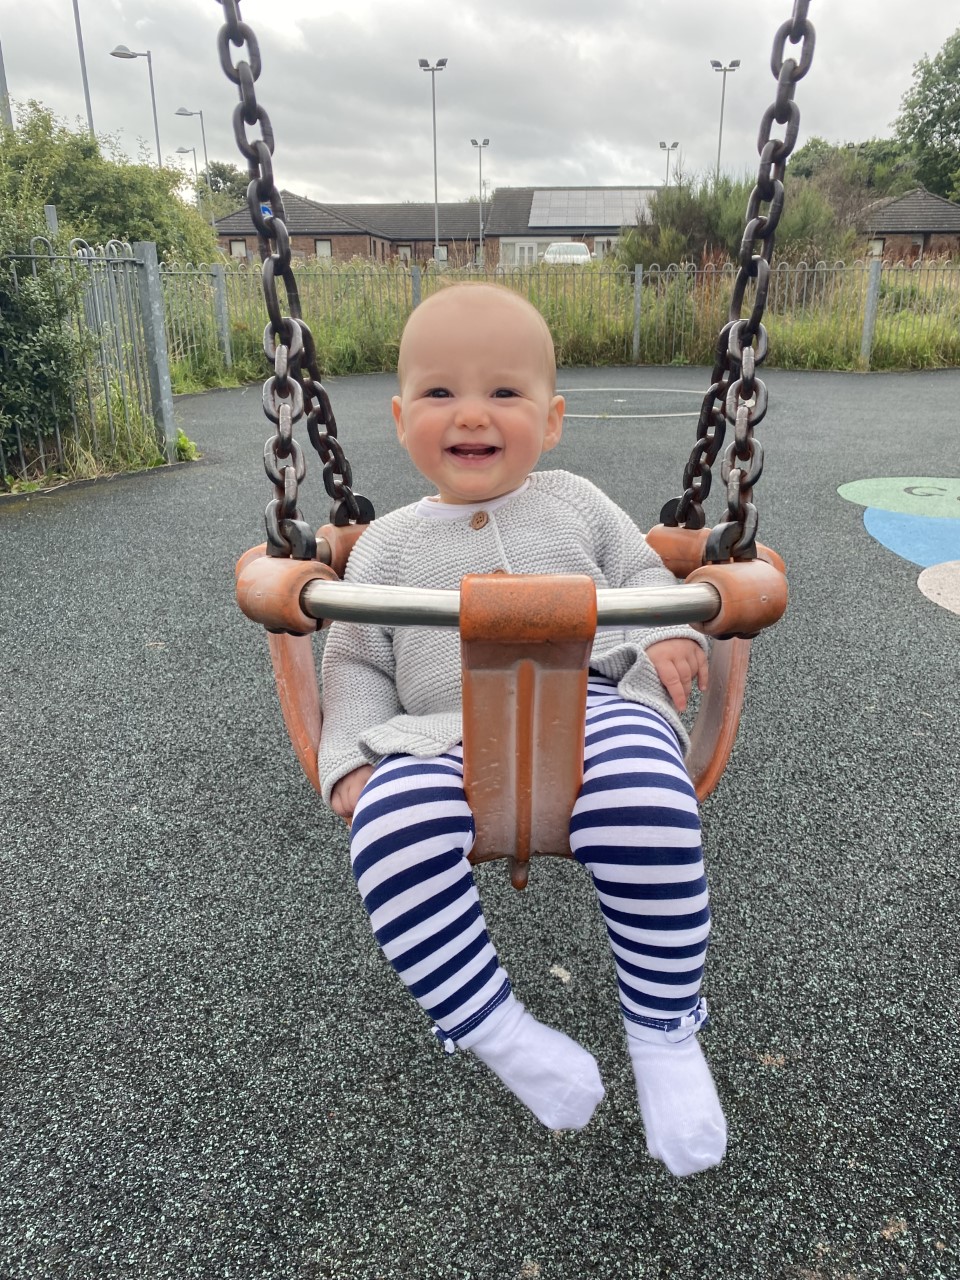 A baby girl on a swing in an outdoor play area